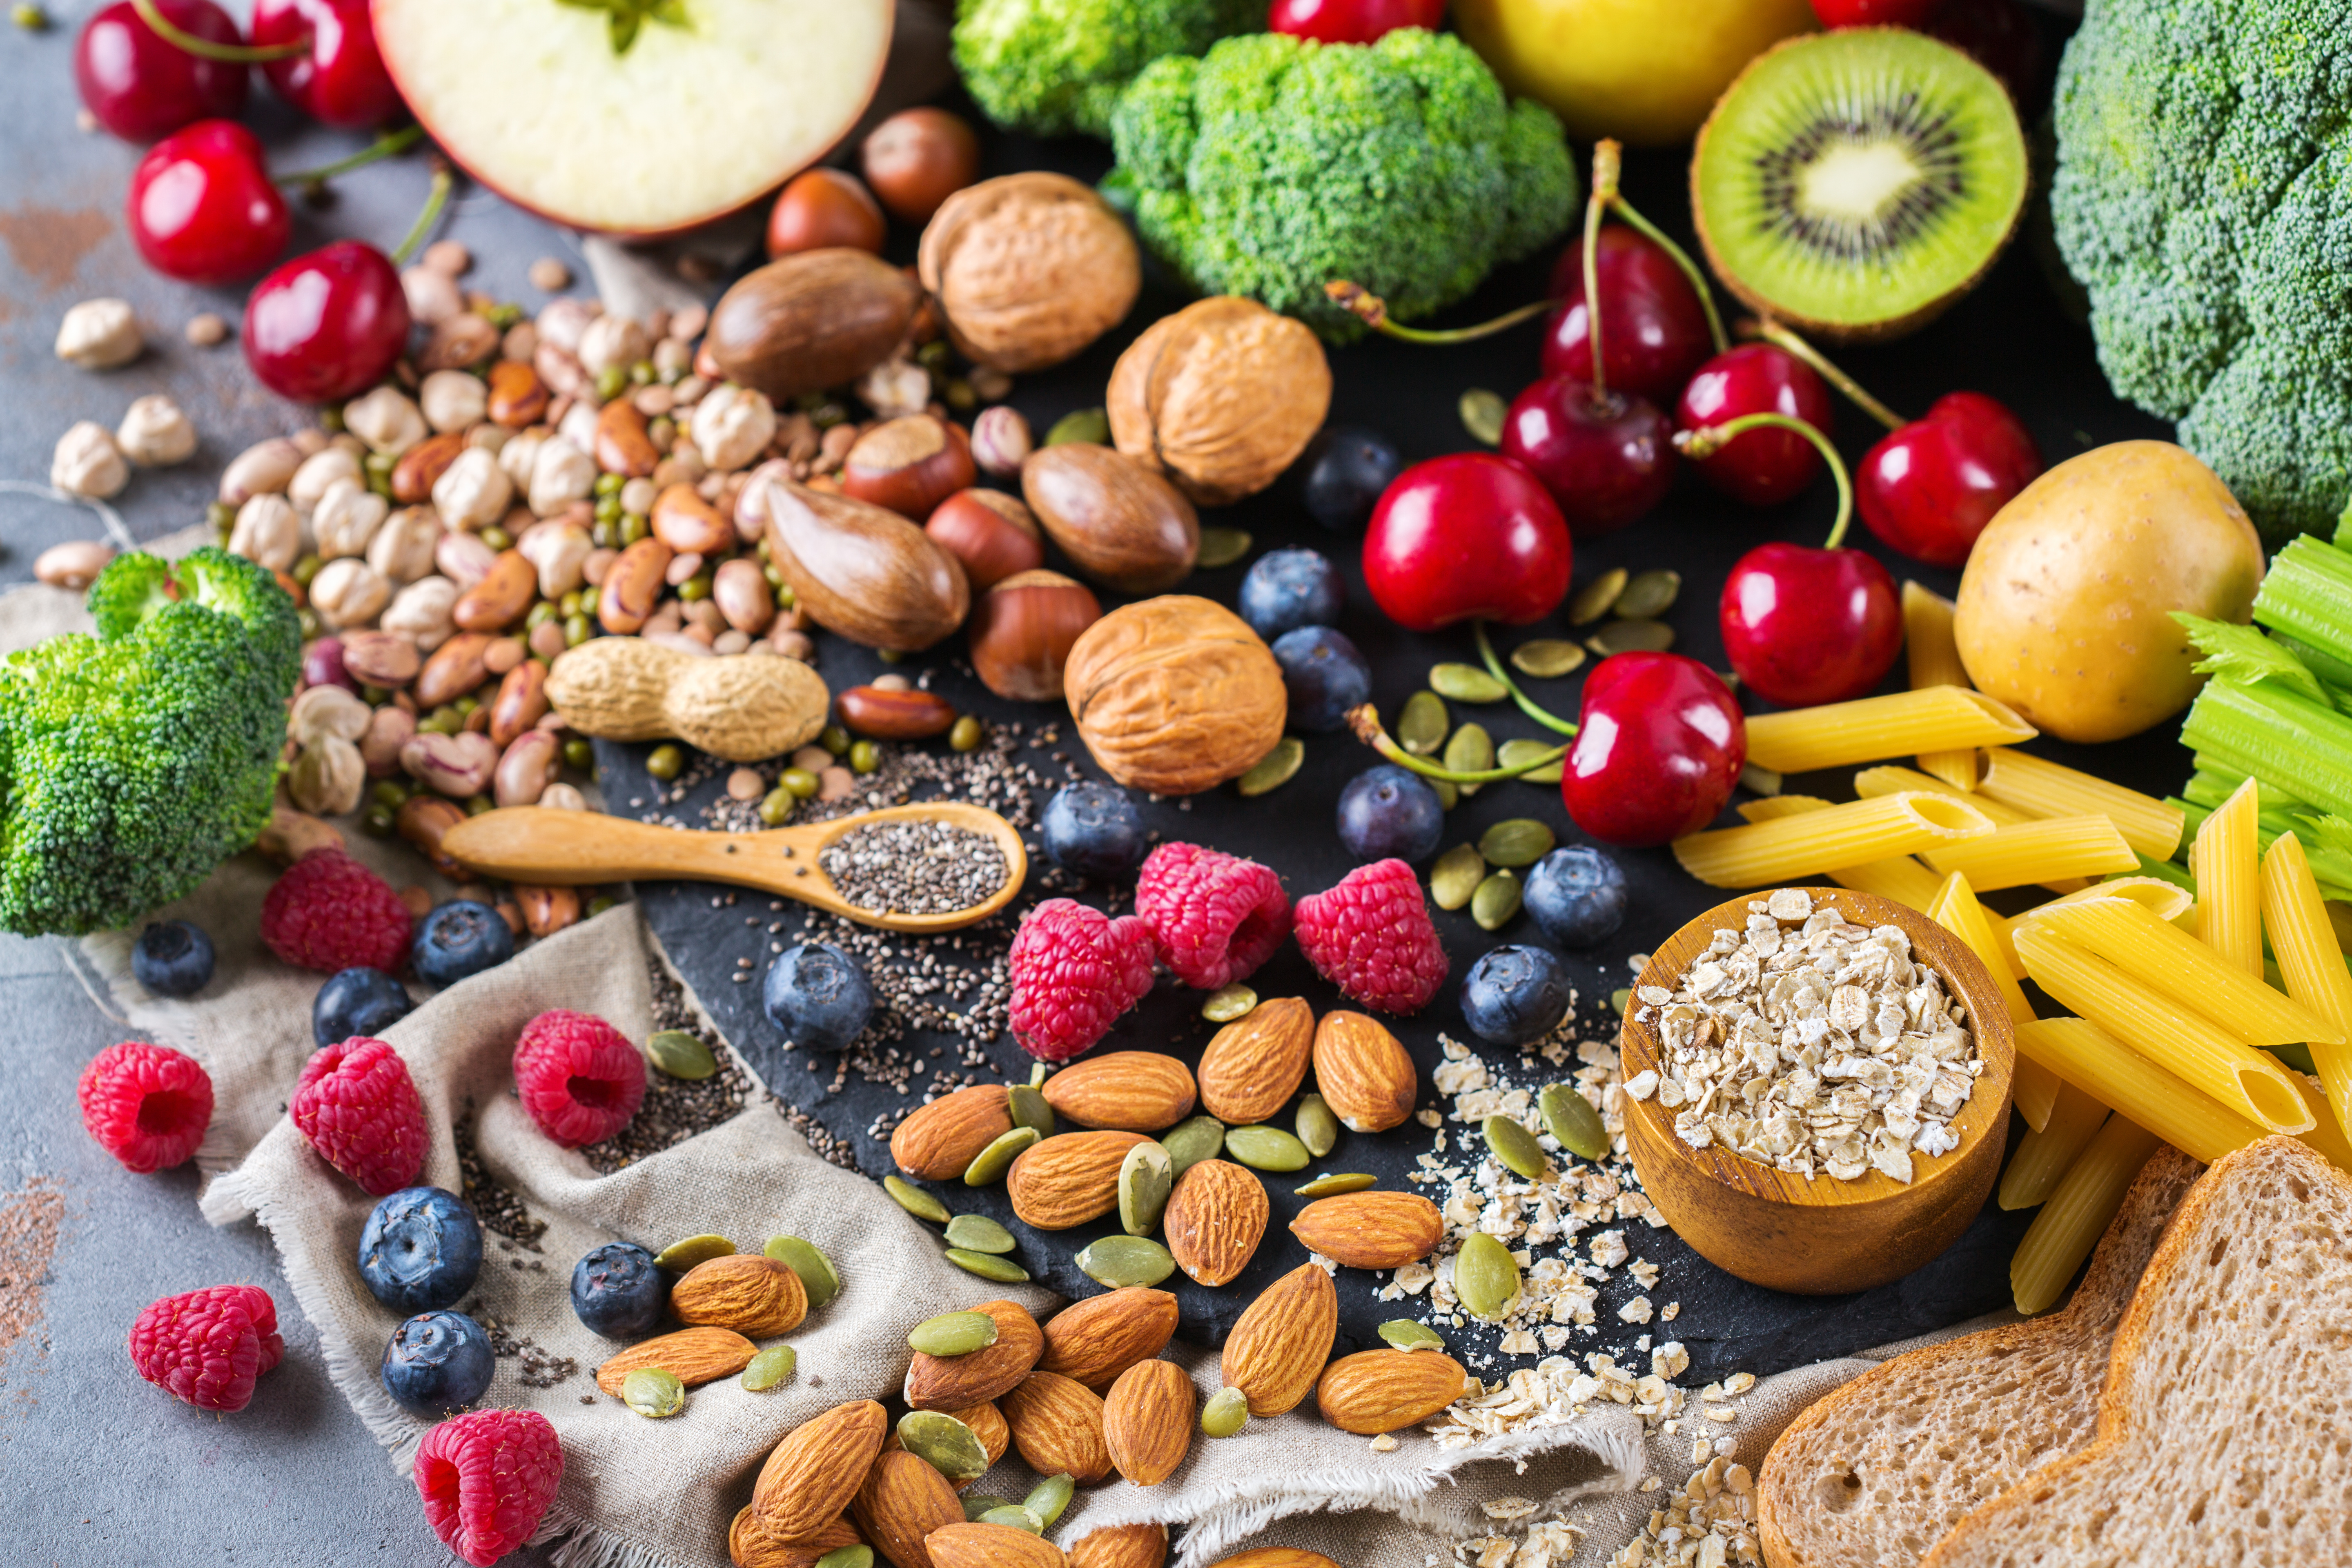 A selection of fruit, vegetables, nuts, seeds and grains